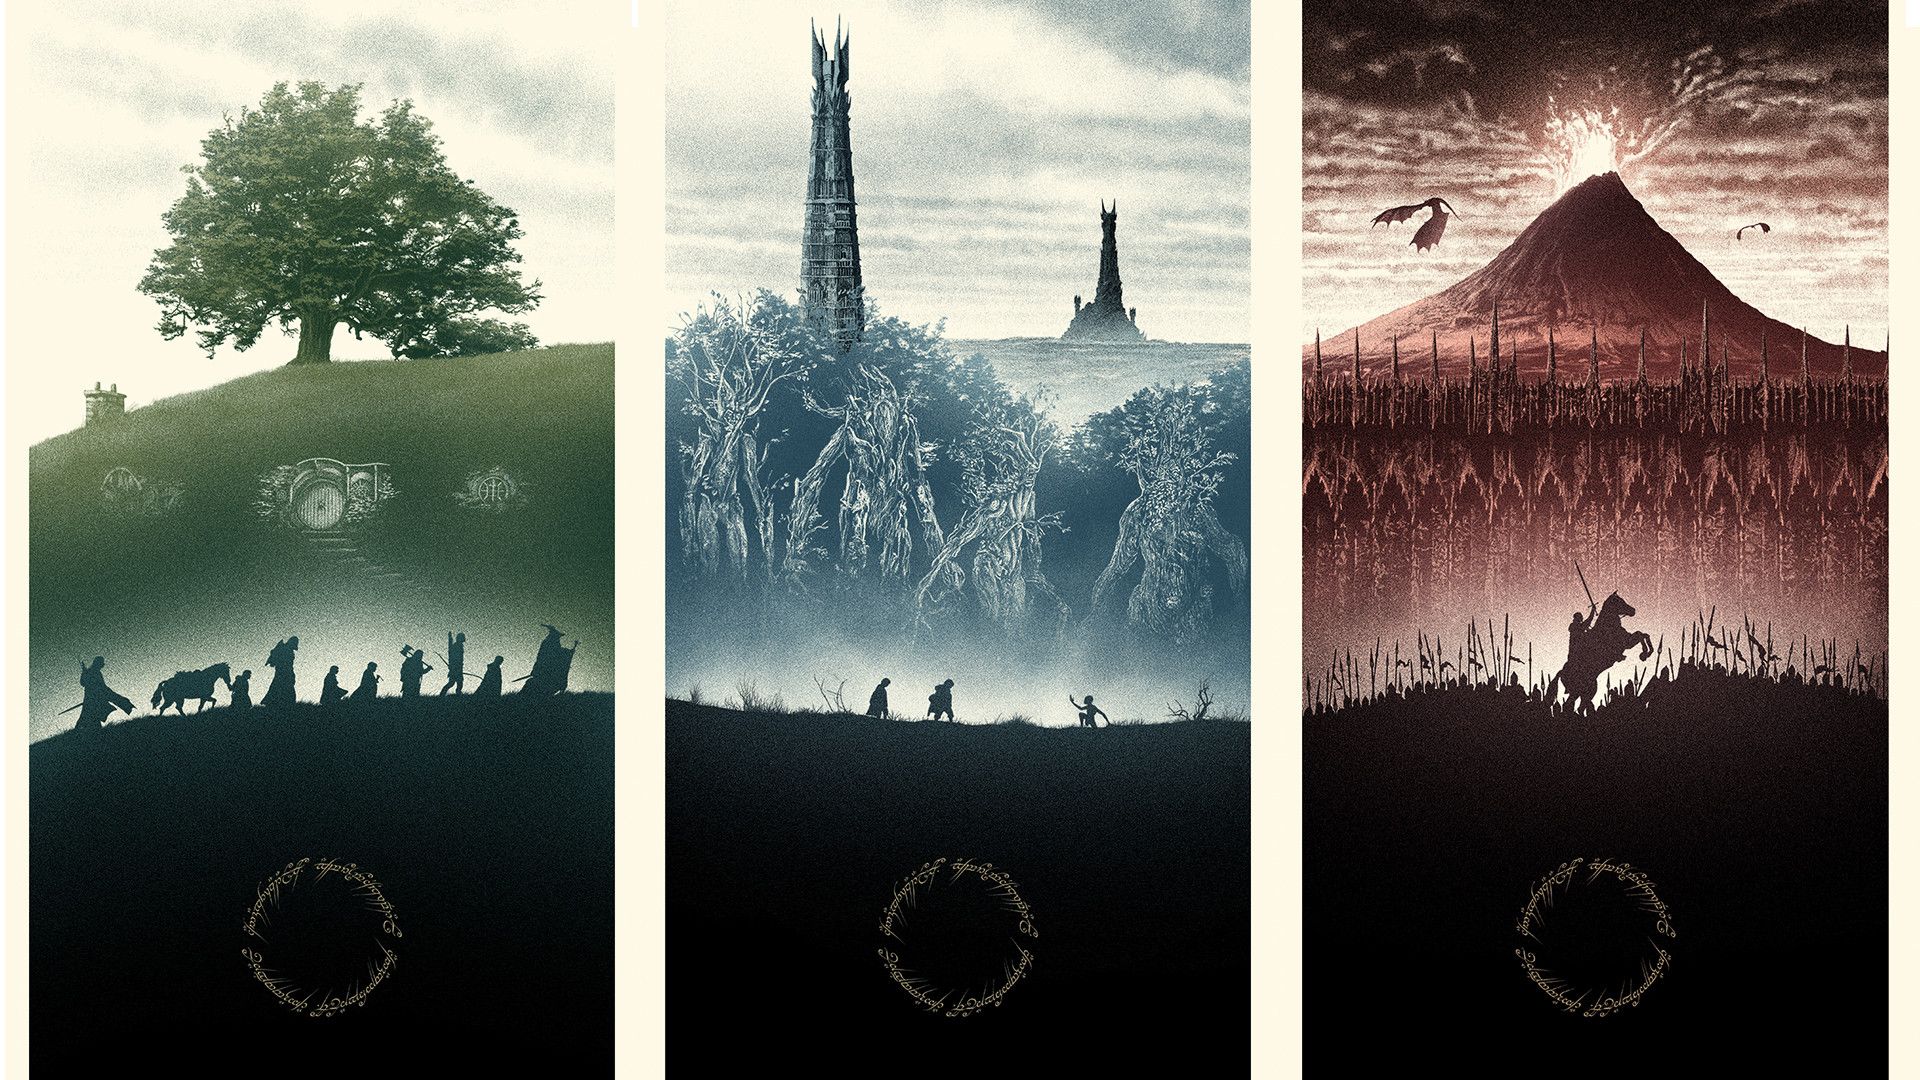 Lord of the Rings wallpaper, by Marko Manev [1920x1080] : lotr